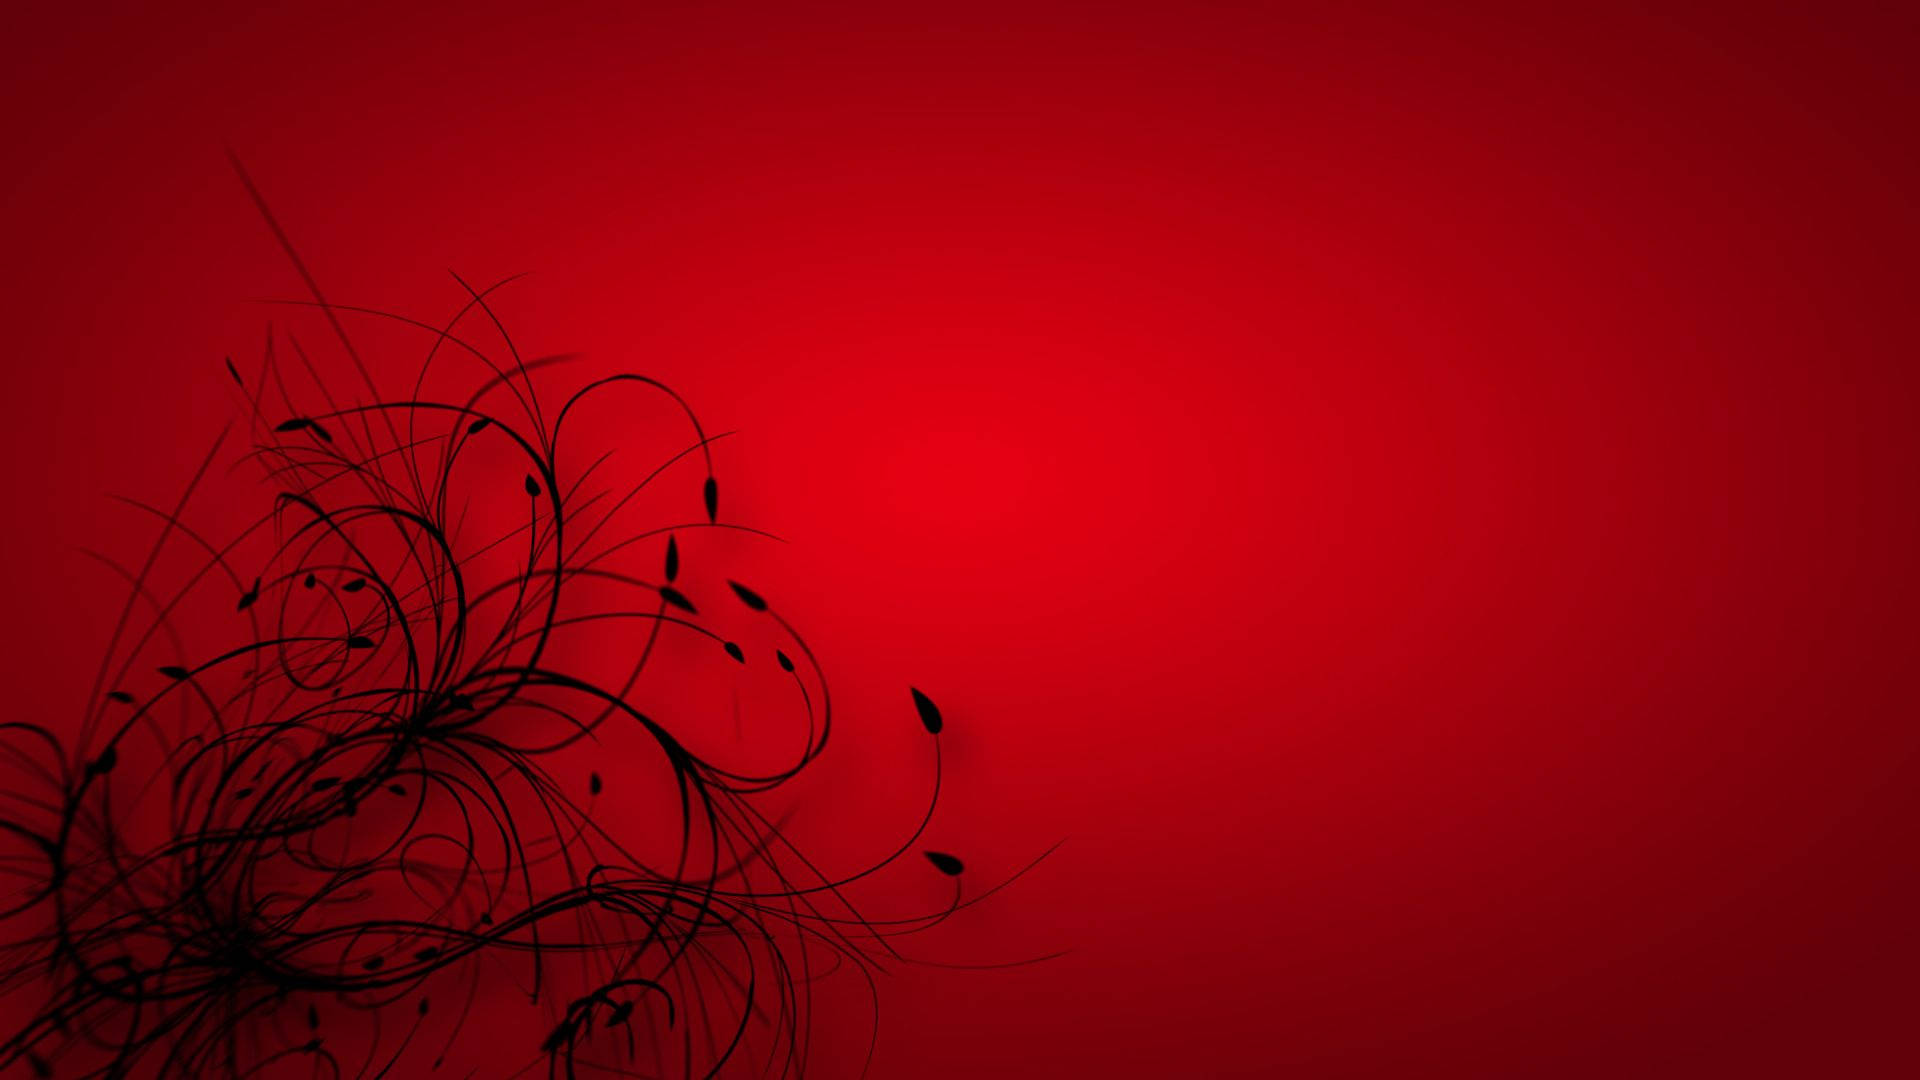 Unusual Red Background With Black Weeds Wallpaper